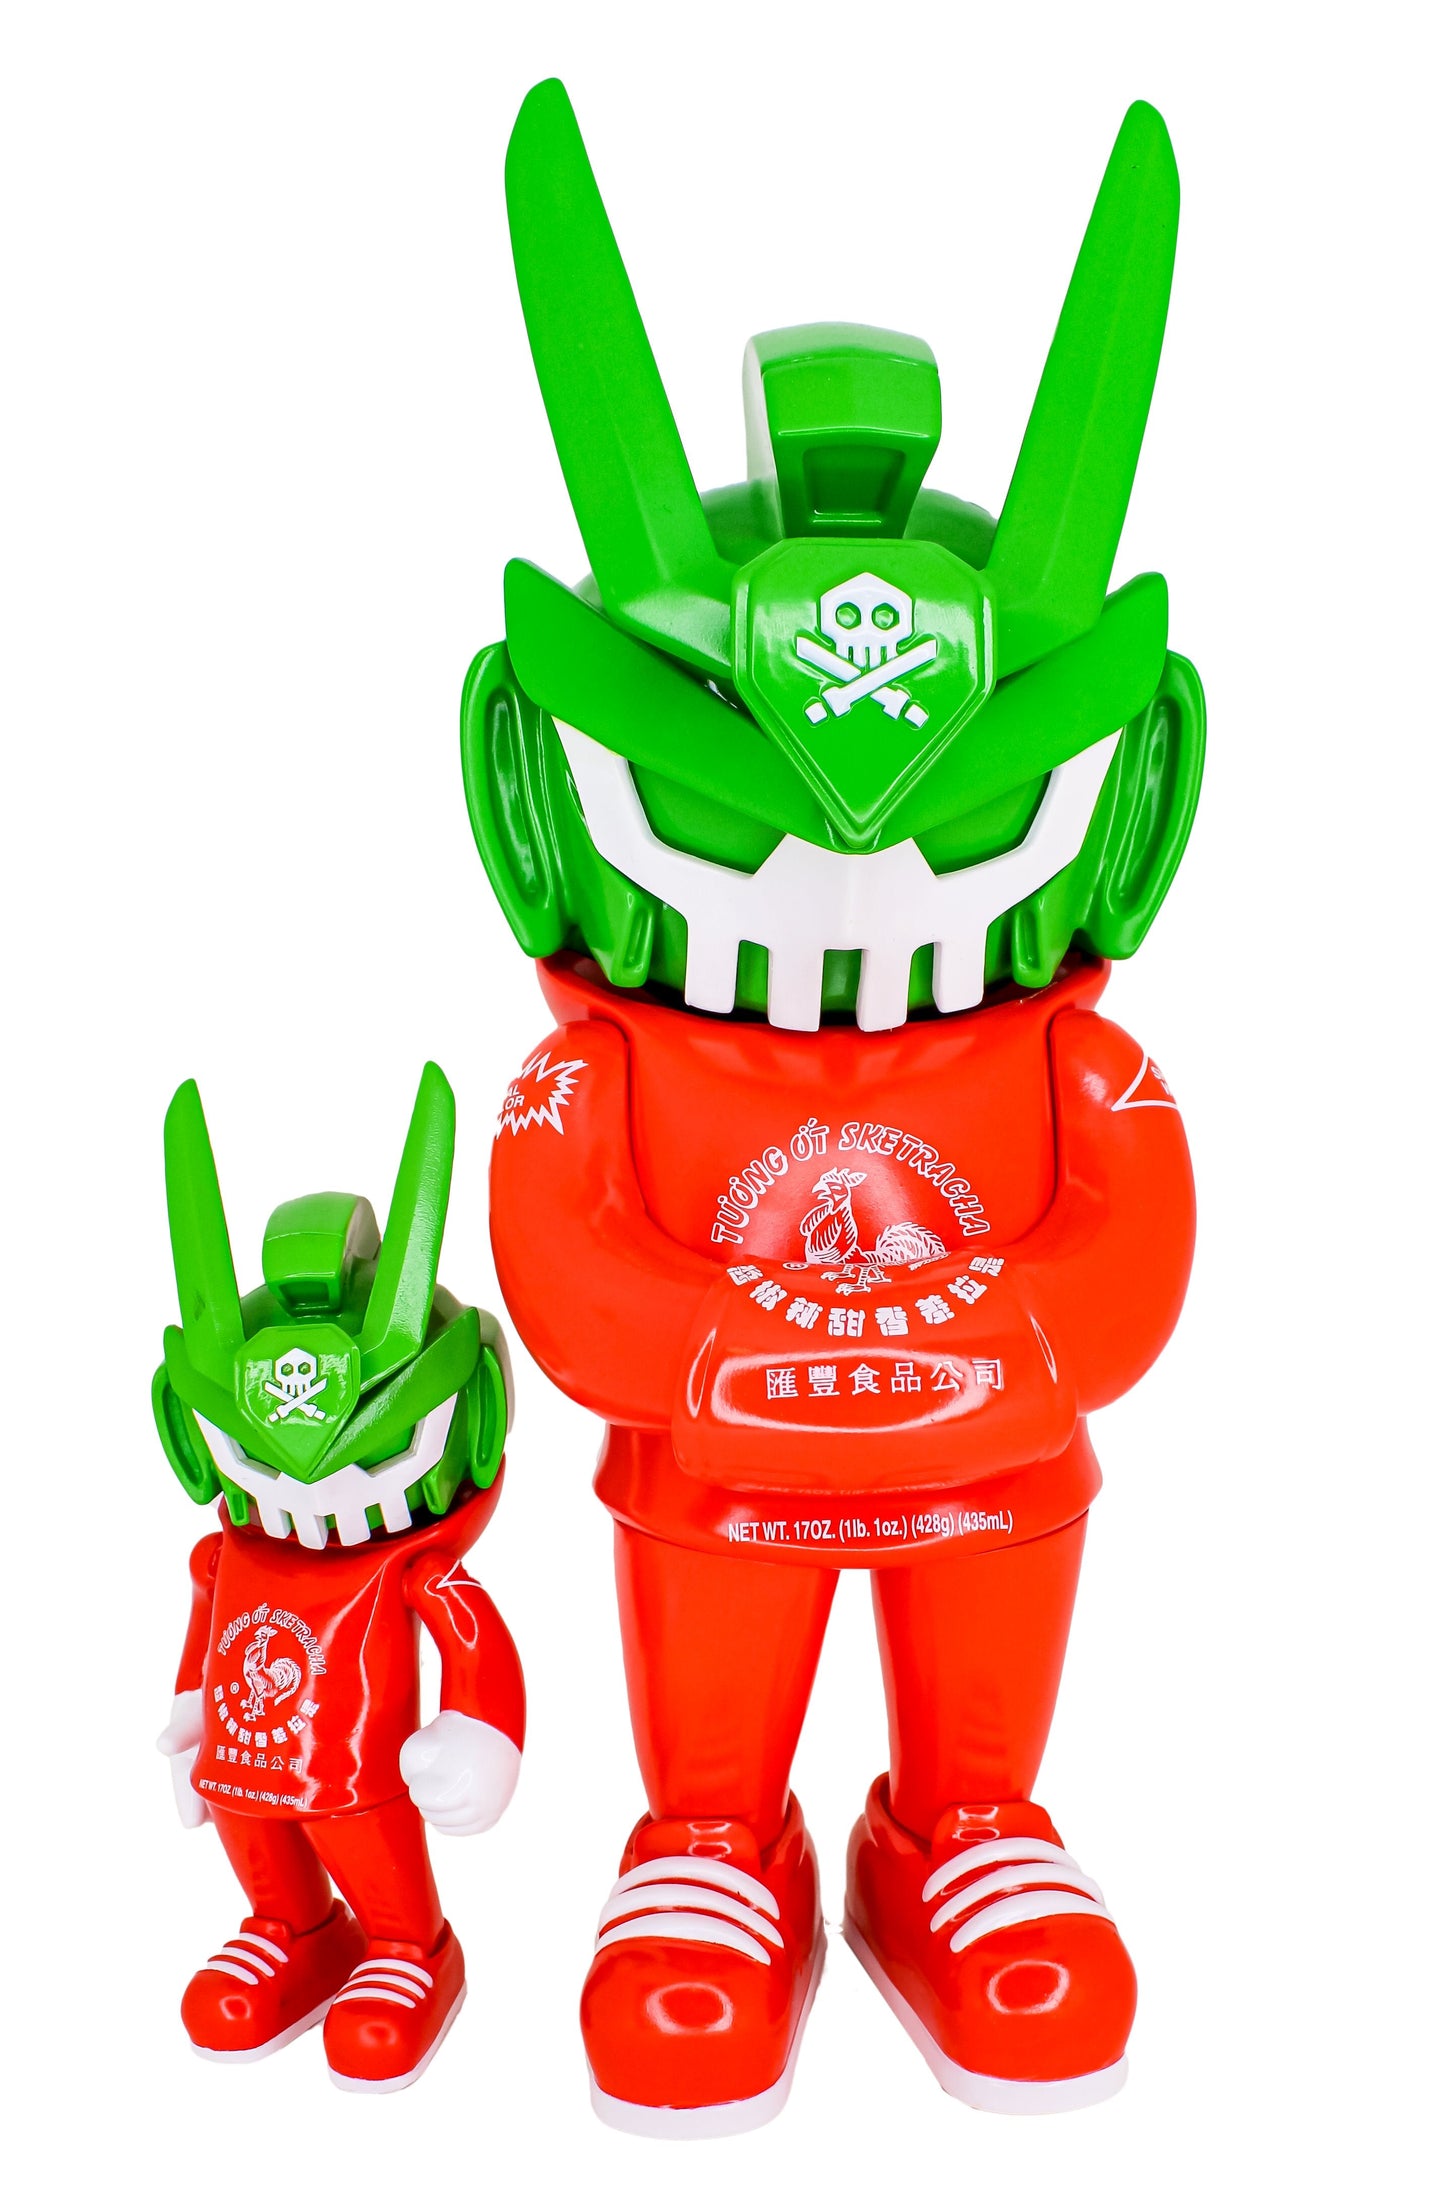 IN STOCK LE399 MARTIAN TOYS MEGATEQ Sketracha 12” Artist Series 2 By SketOne x Quiccs x Martian Toys